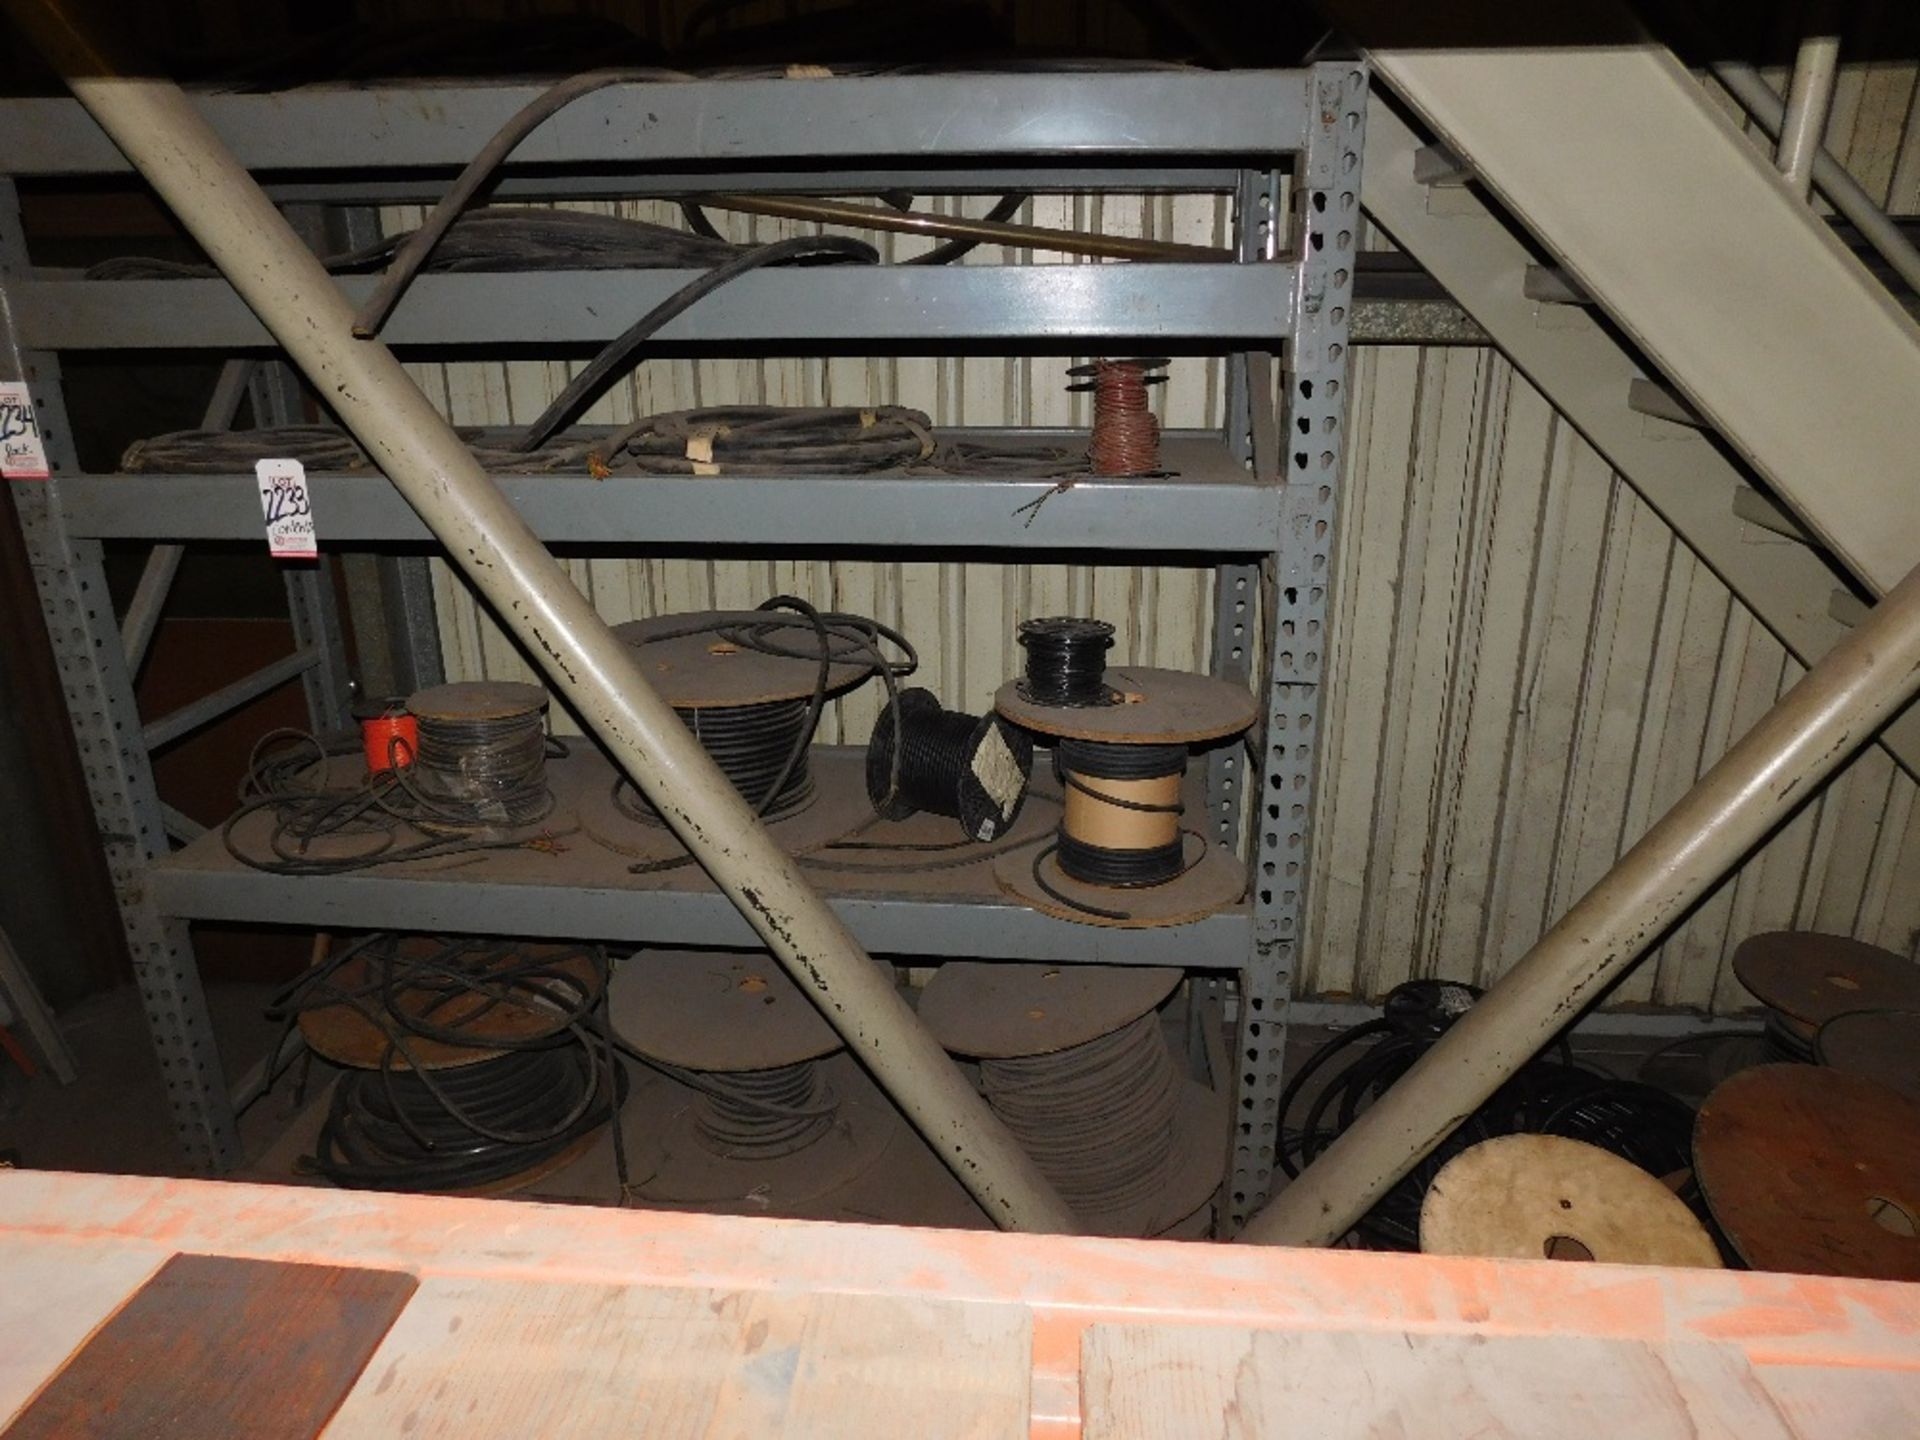 LOT - CONTENTS OF RACK ONLY: WIRE SPOOLS, PLUS SPOOLS ON FLOOR NEXT TO RACK (RACK NOT INCLUDED) - Image 3 of 3